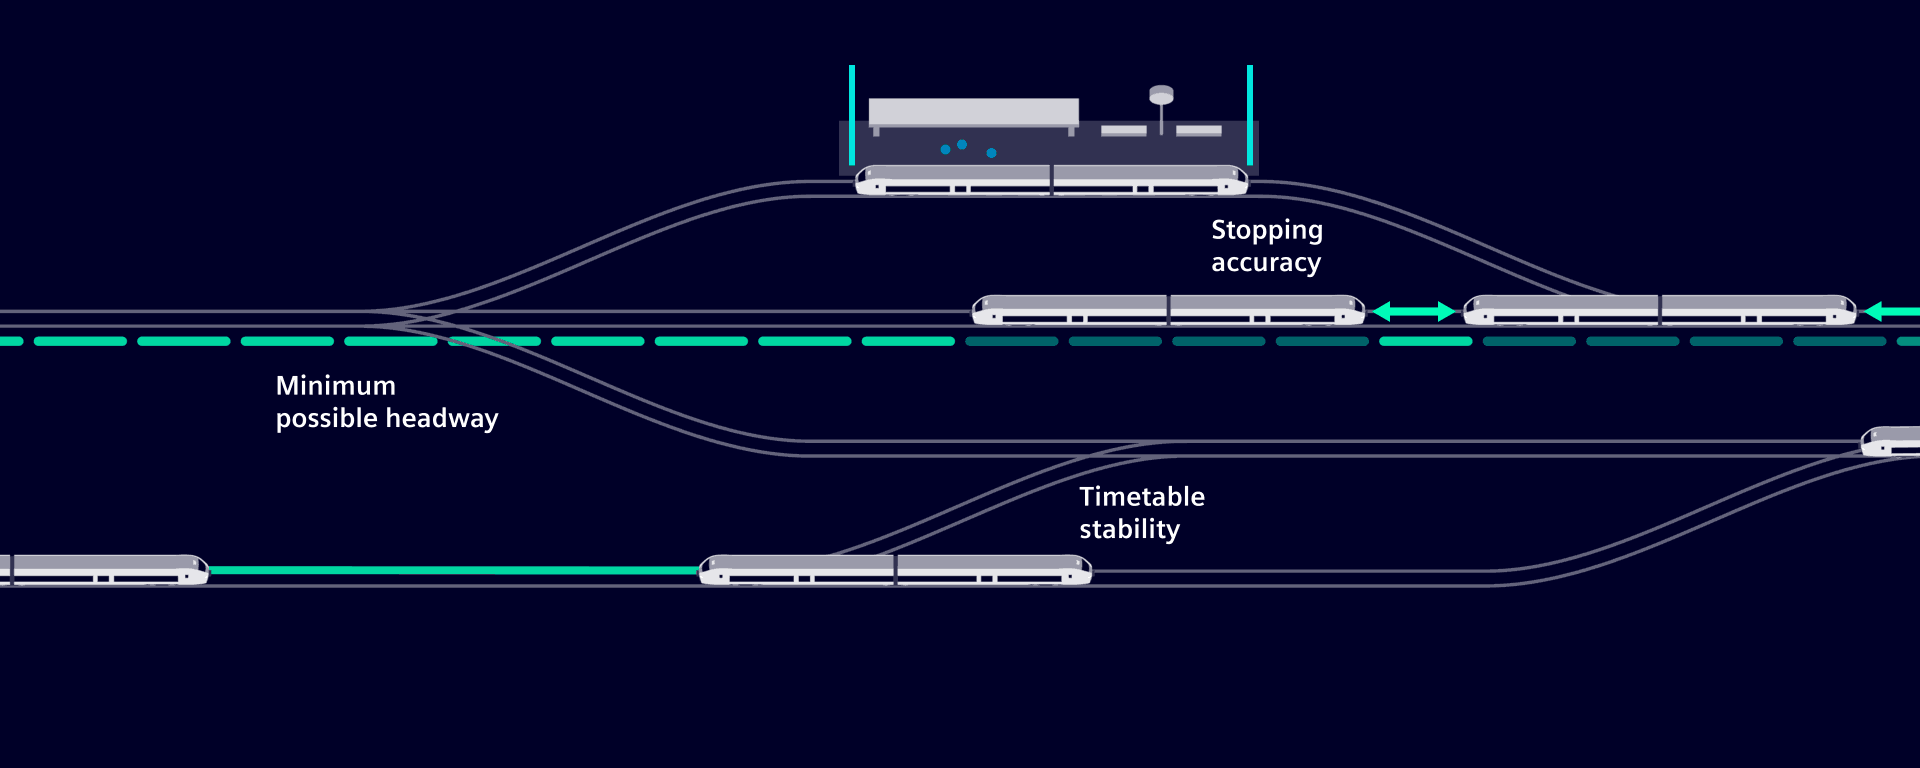 ATO over ETCS expands the transport capacity of existing lines and allows smoother operations.